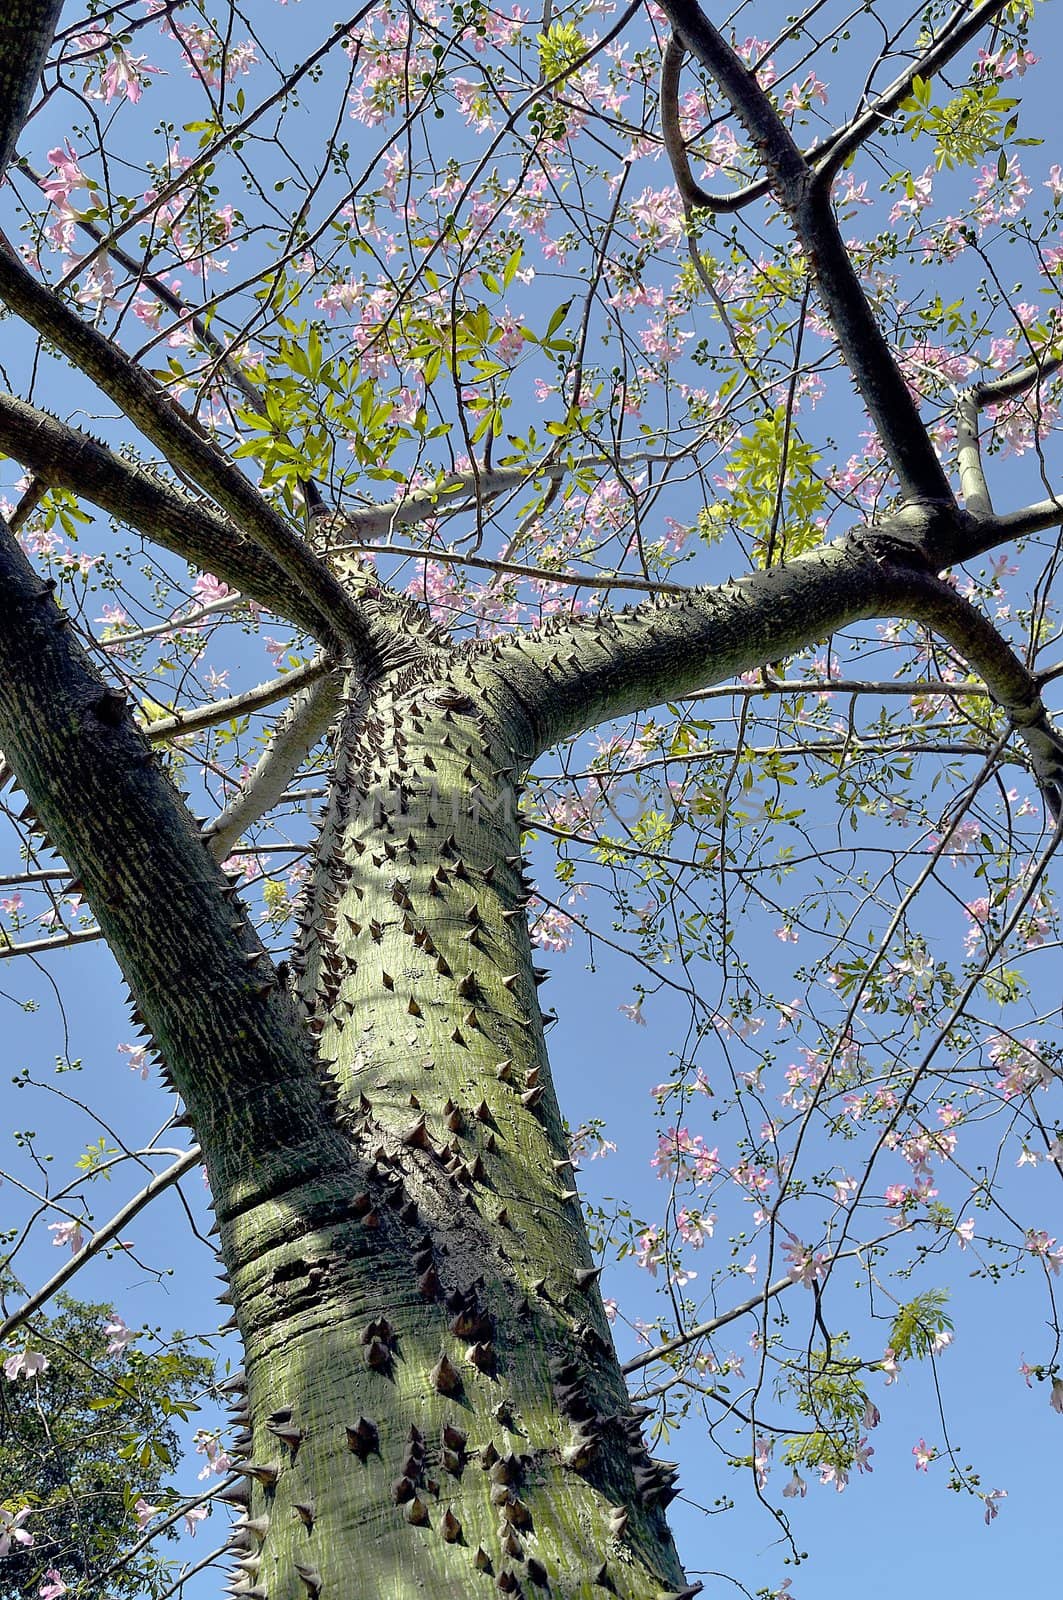 The thorny trunk of a Silk Floss tree in South Florida